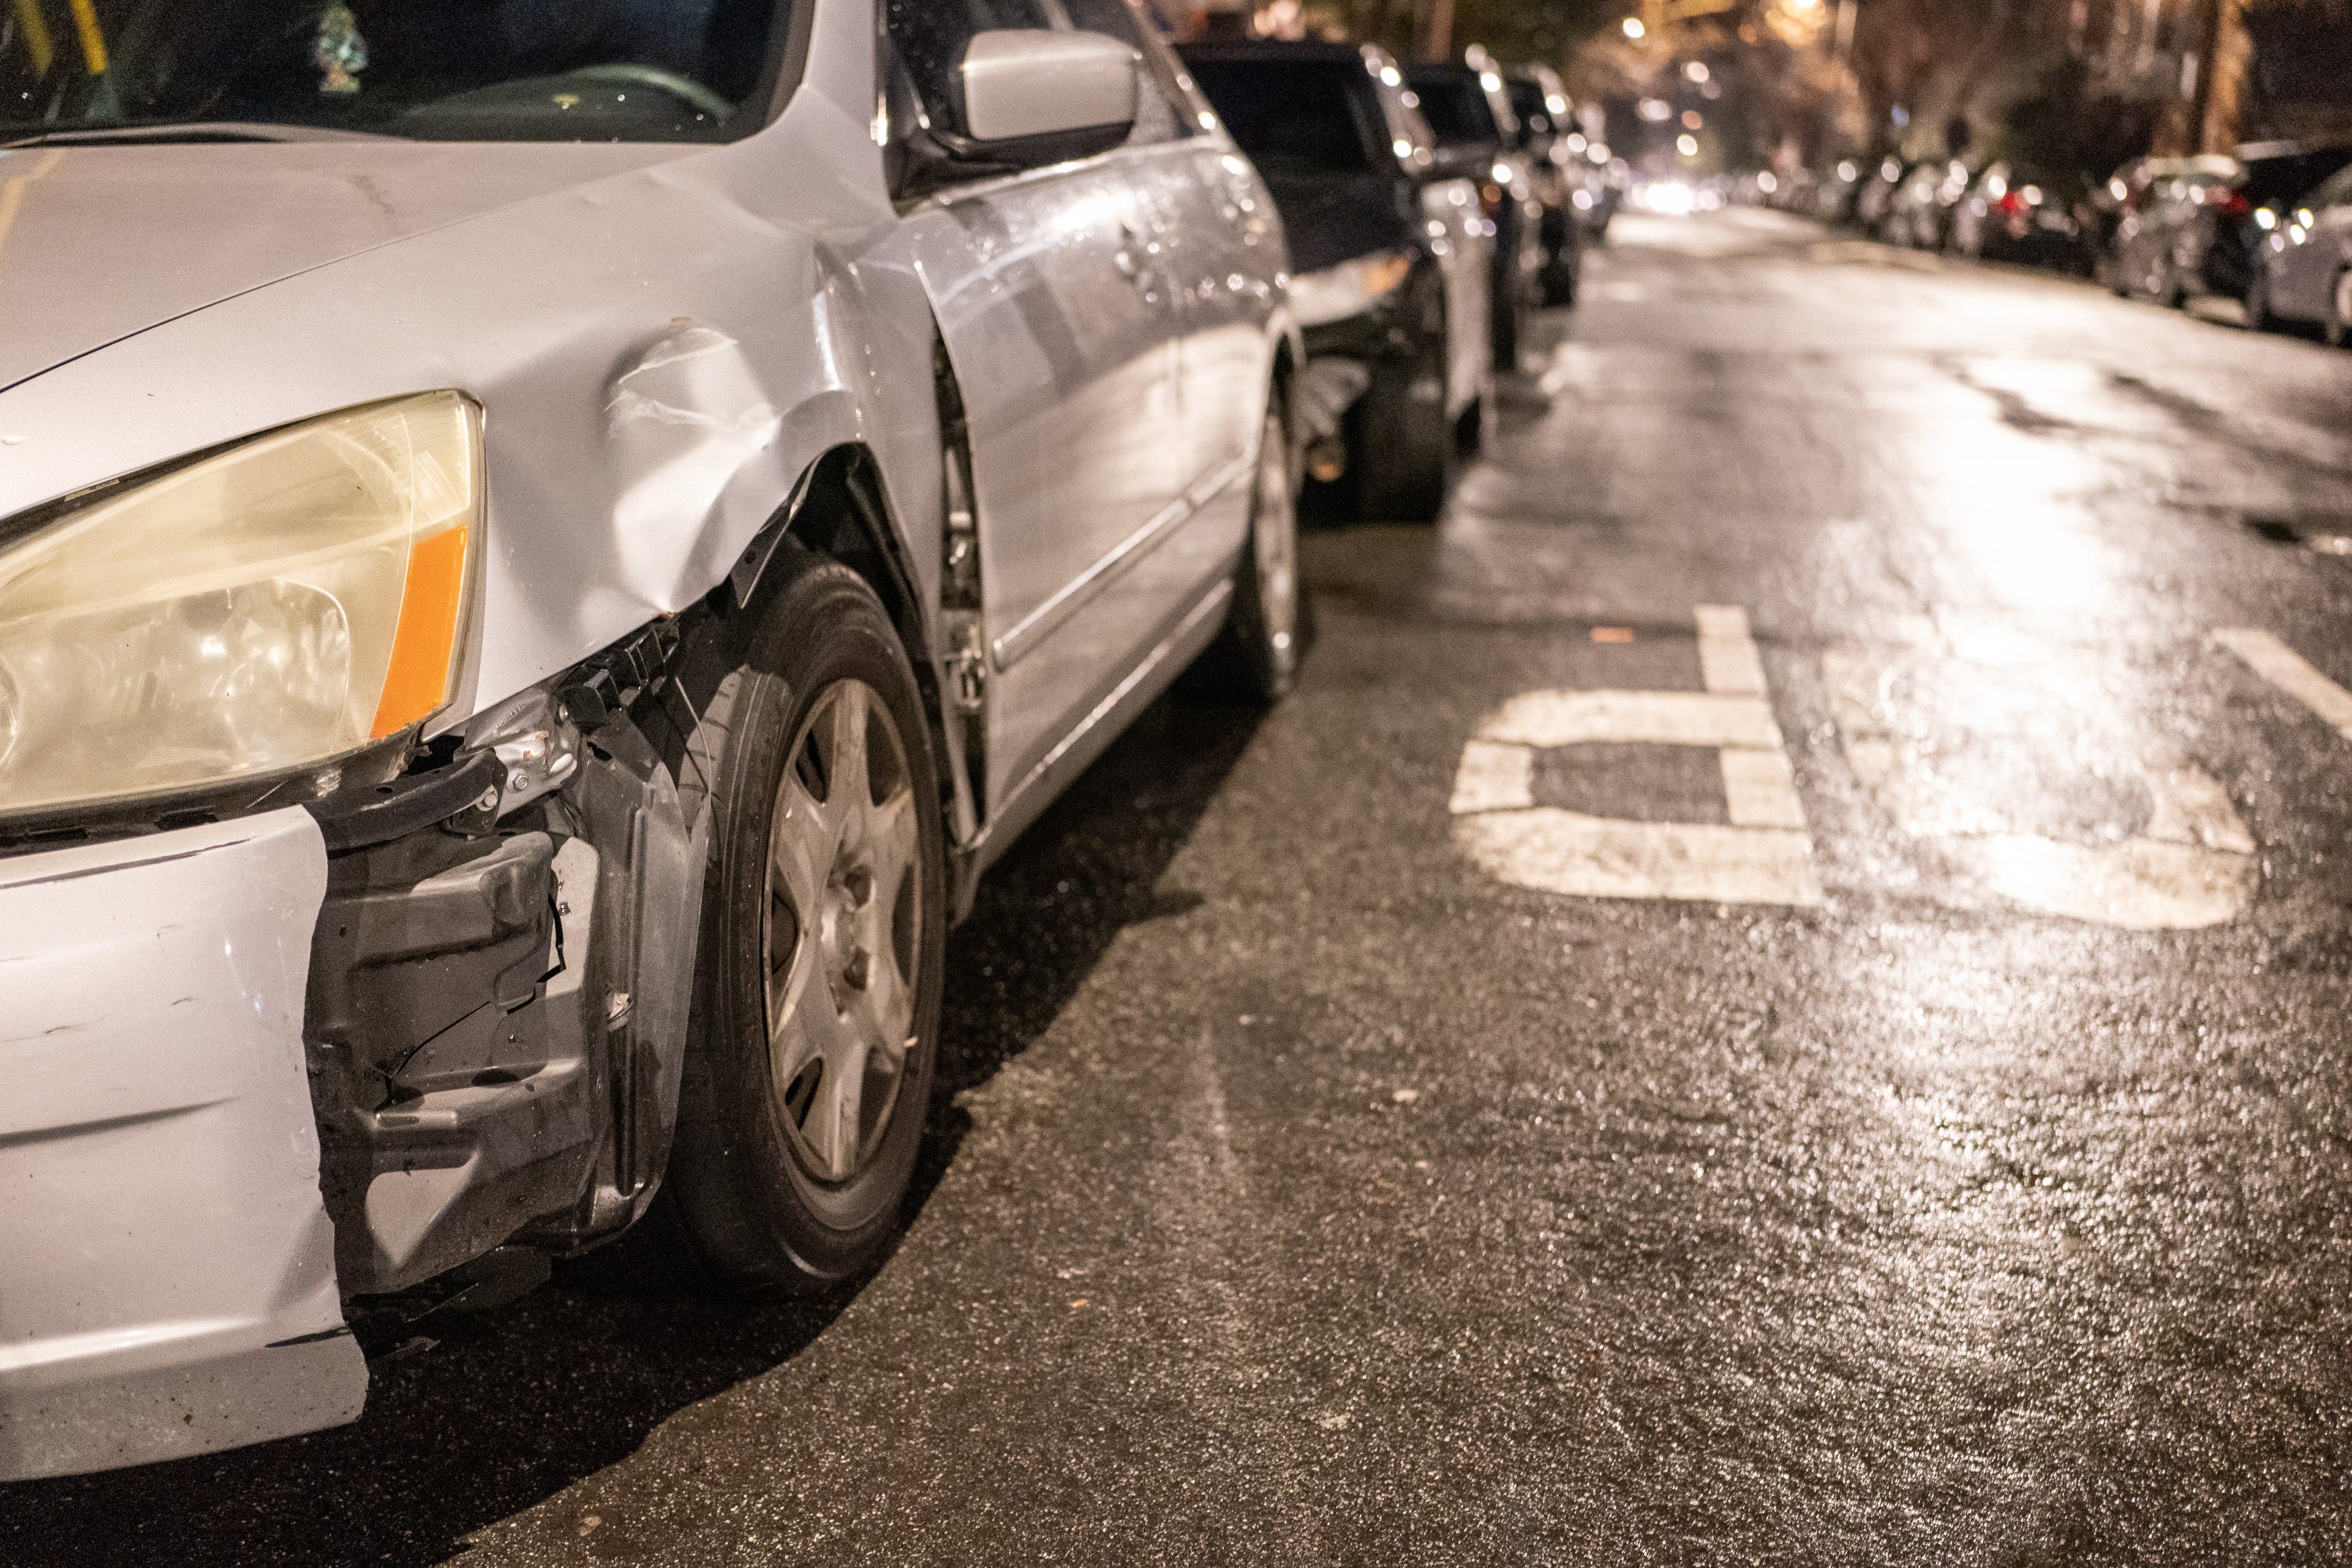 A white car with front-left damage, parked on a wet street at night, with other cars and street markings visible.